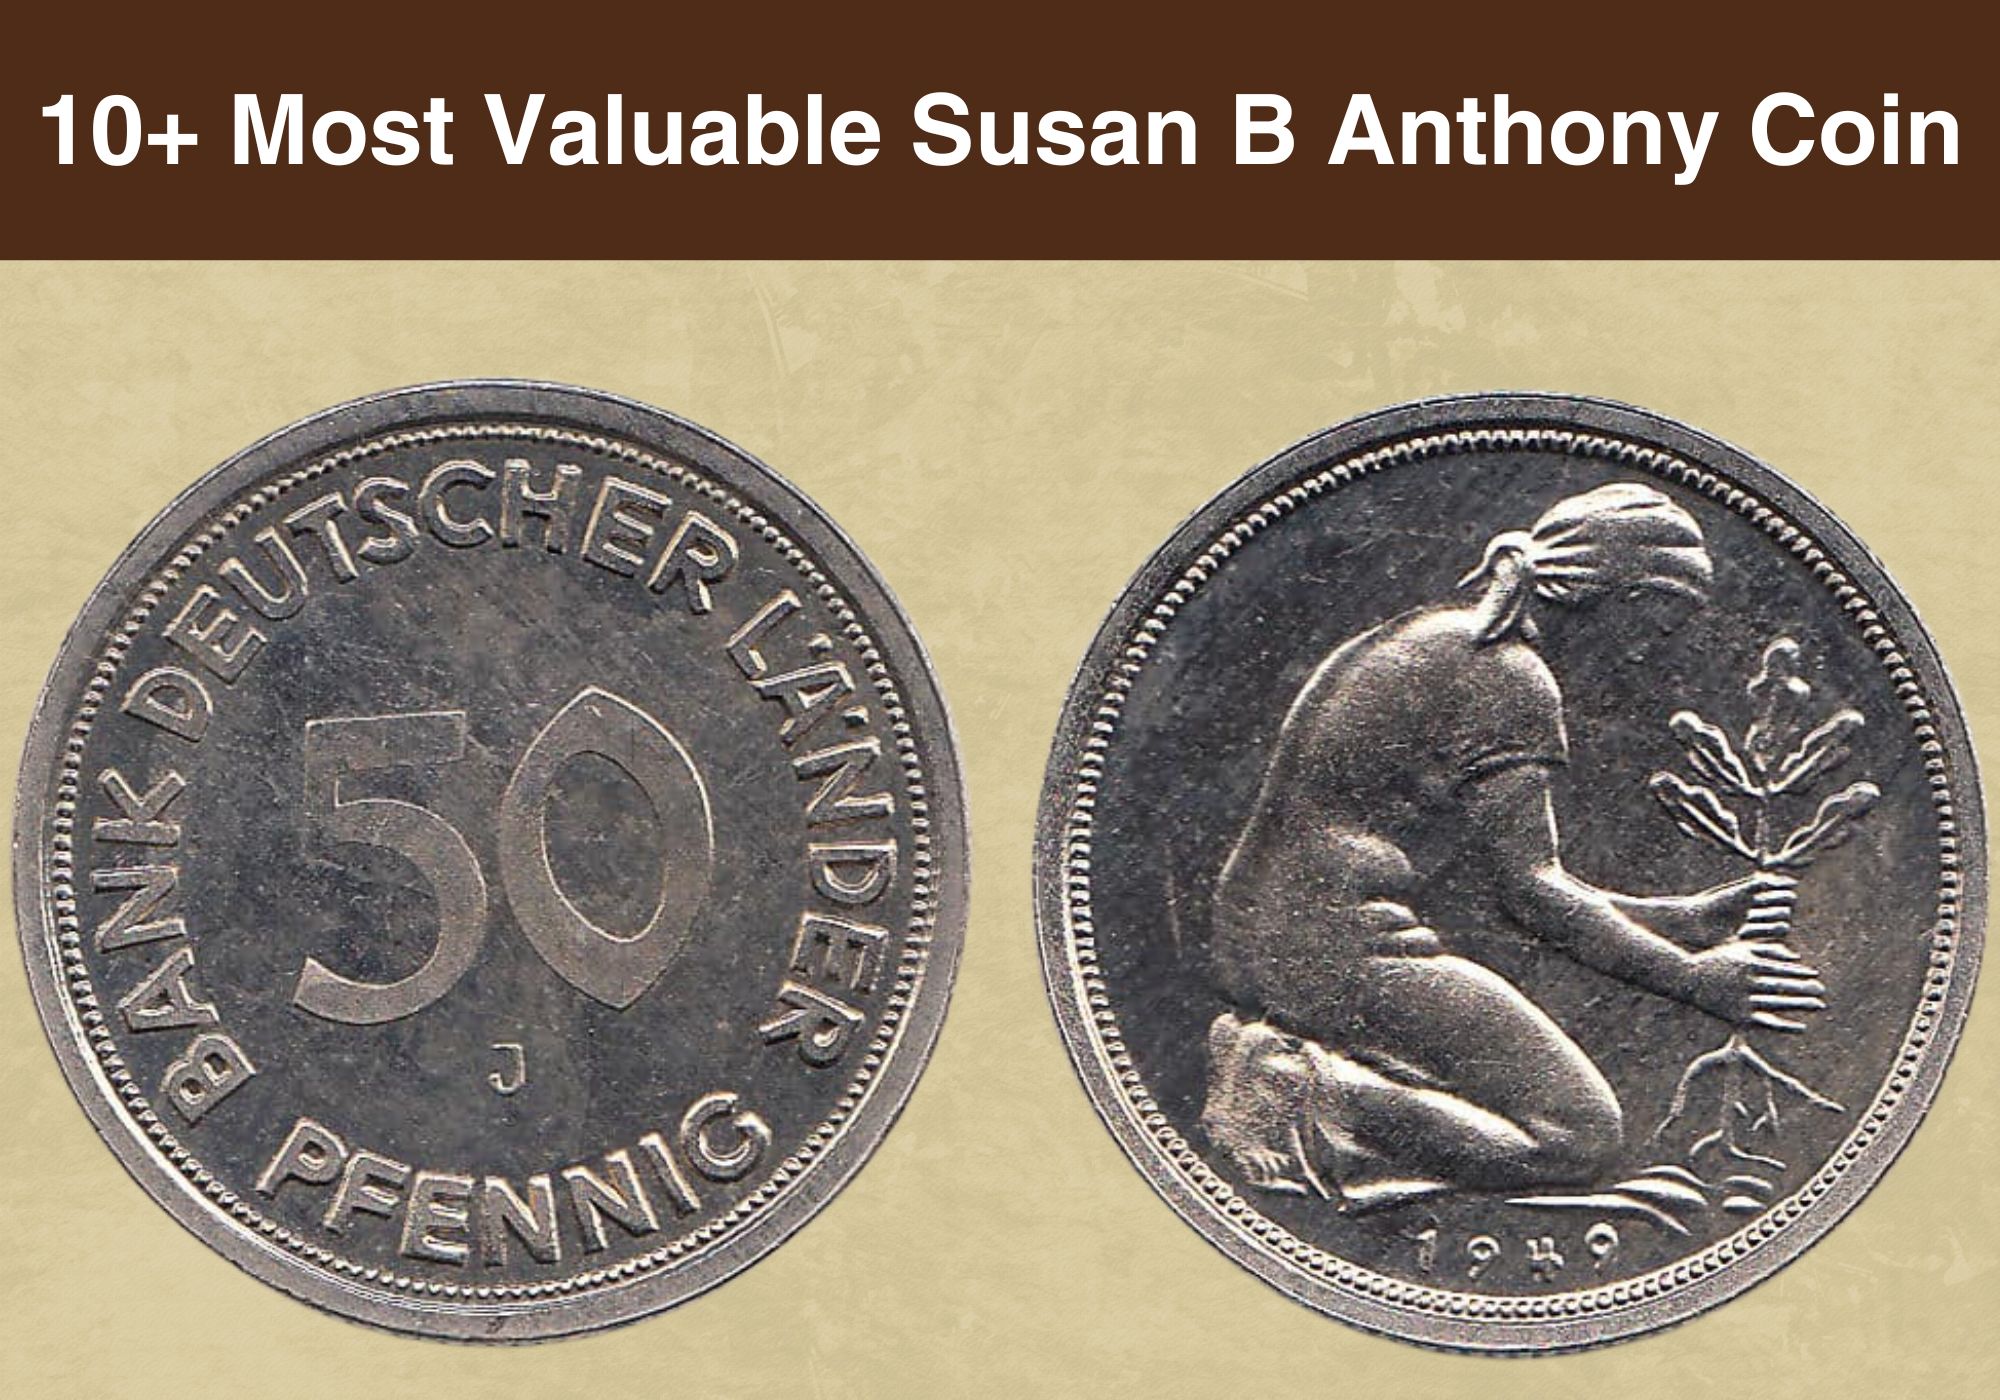 Top 10 Most Valuable German Coins